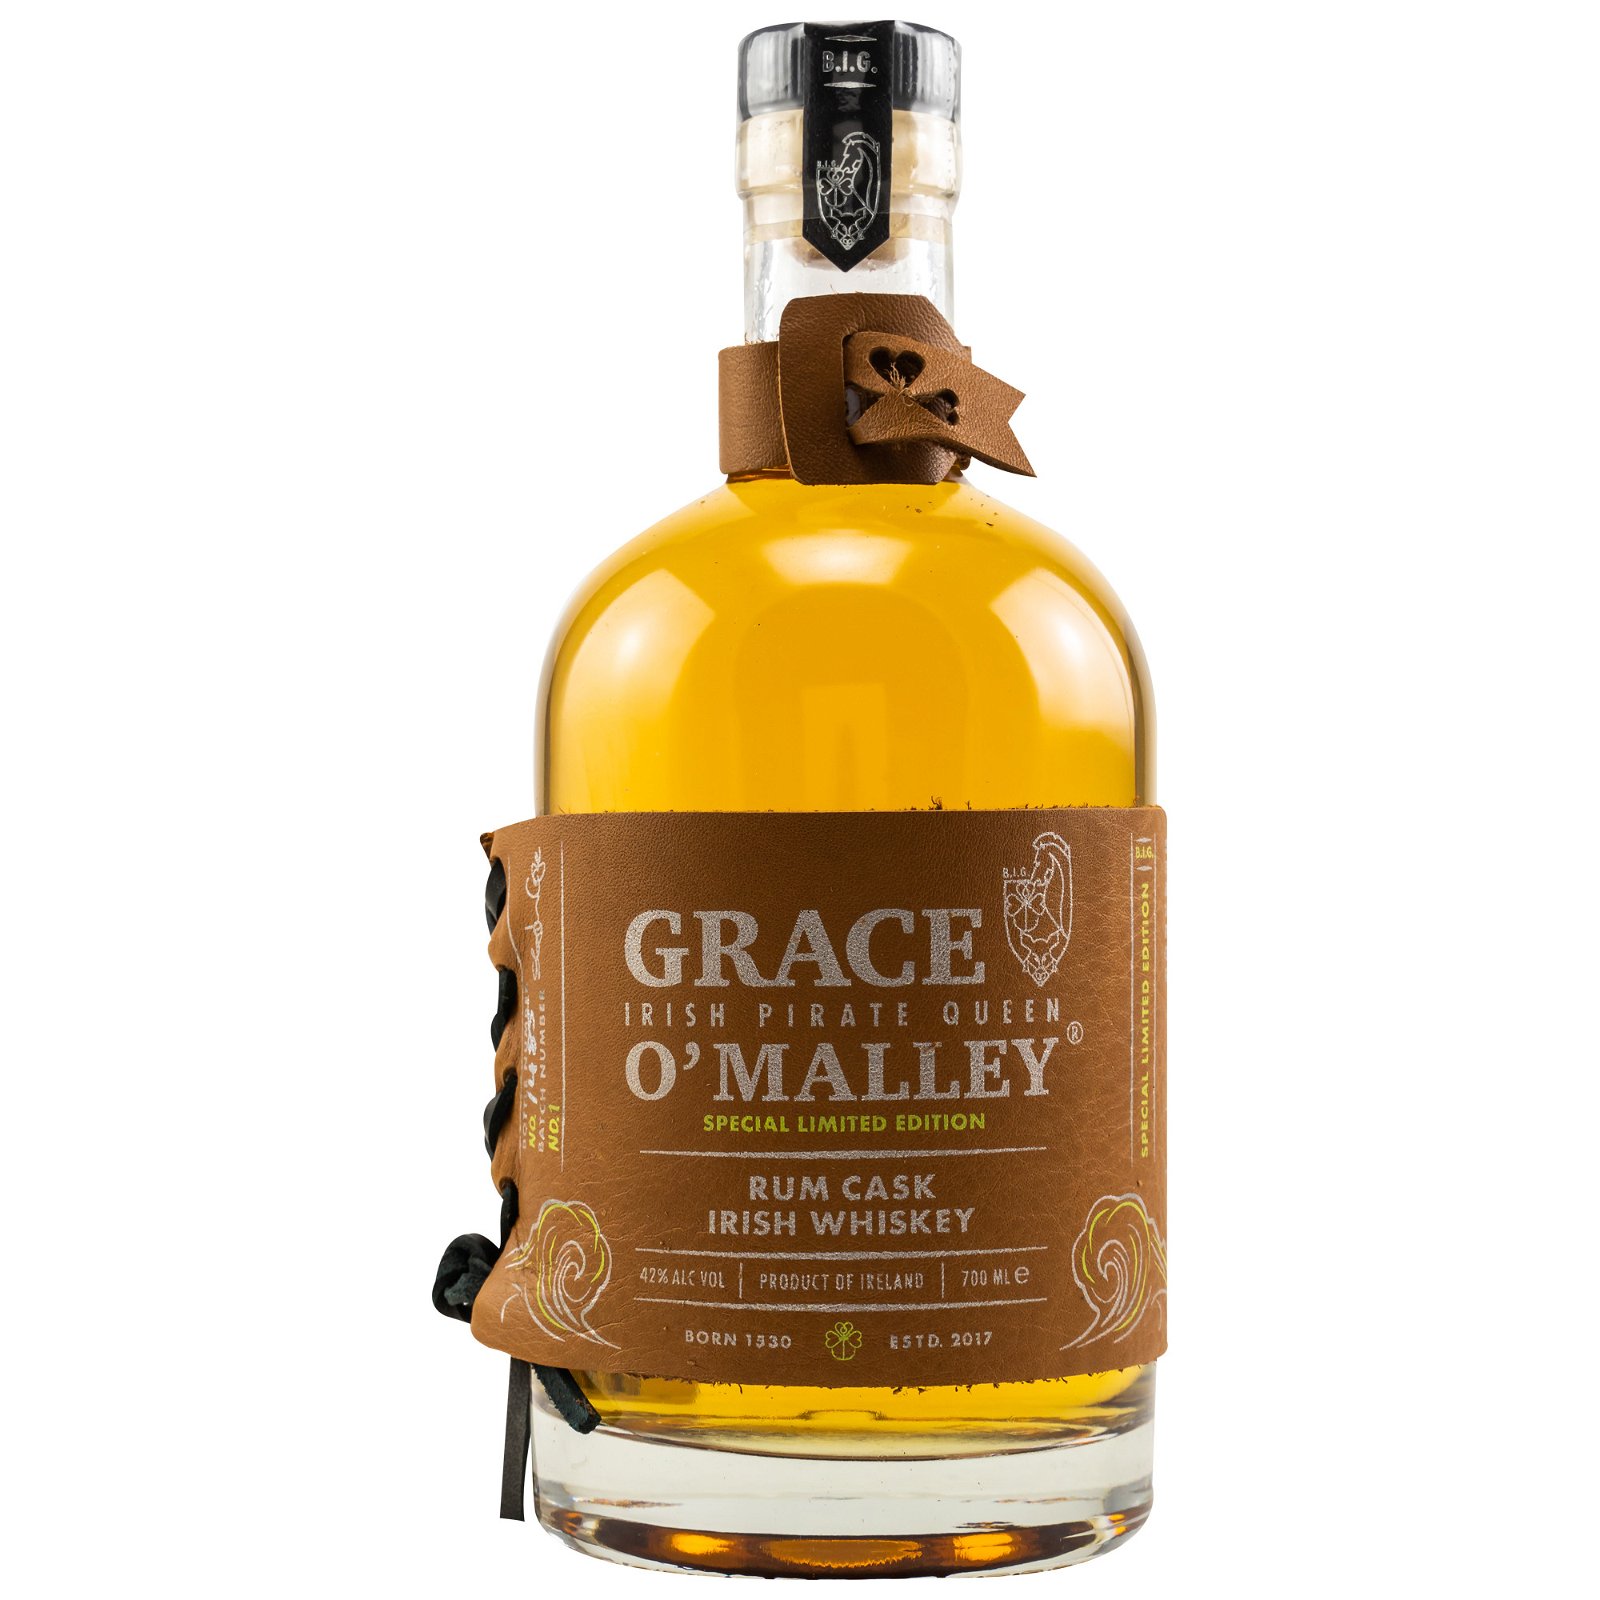 Grace O'Malley Blended Irish Whiskey Rum Cask Finish Special Limited Edition